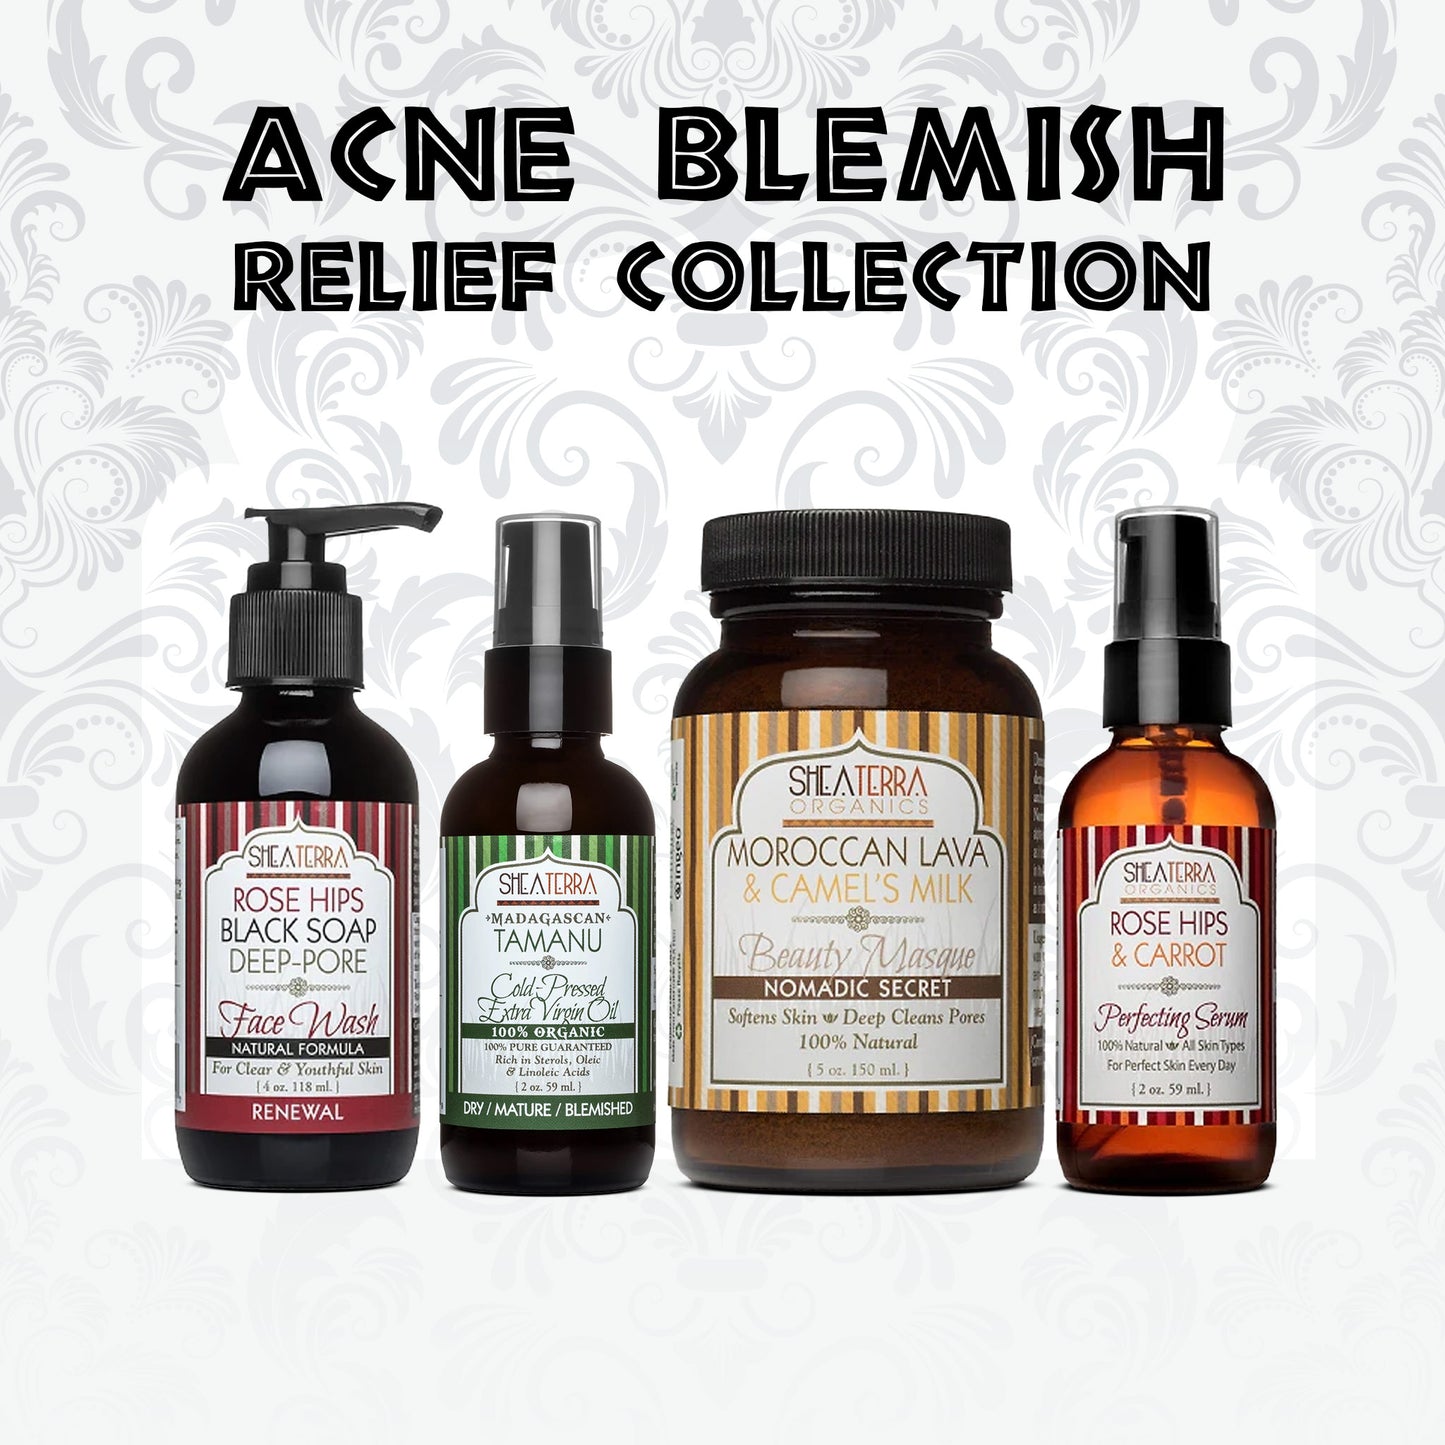 ACNE BLEMISH RELIEF COLLECTION